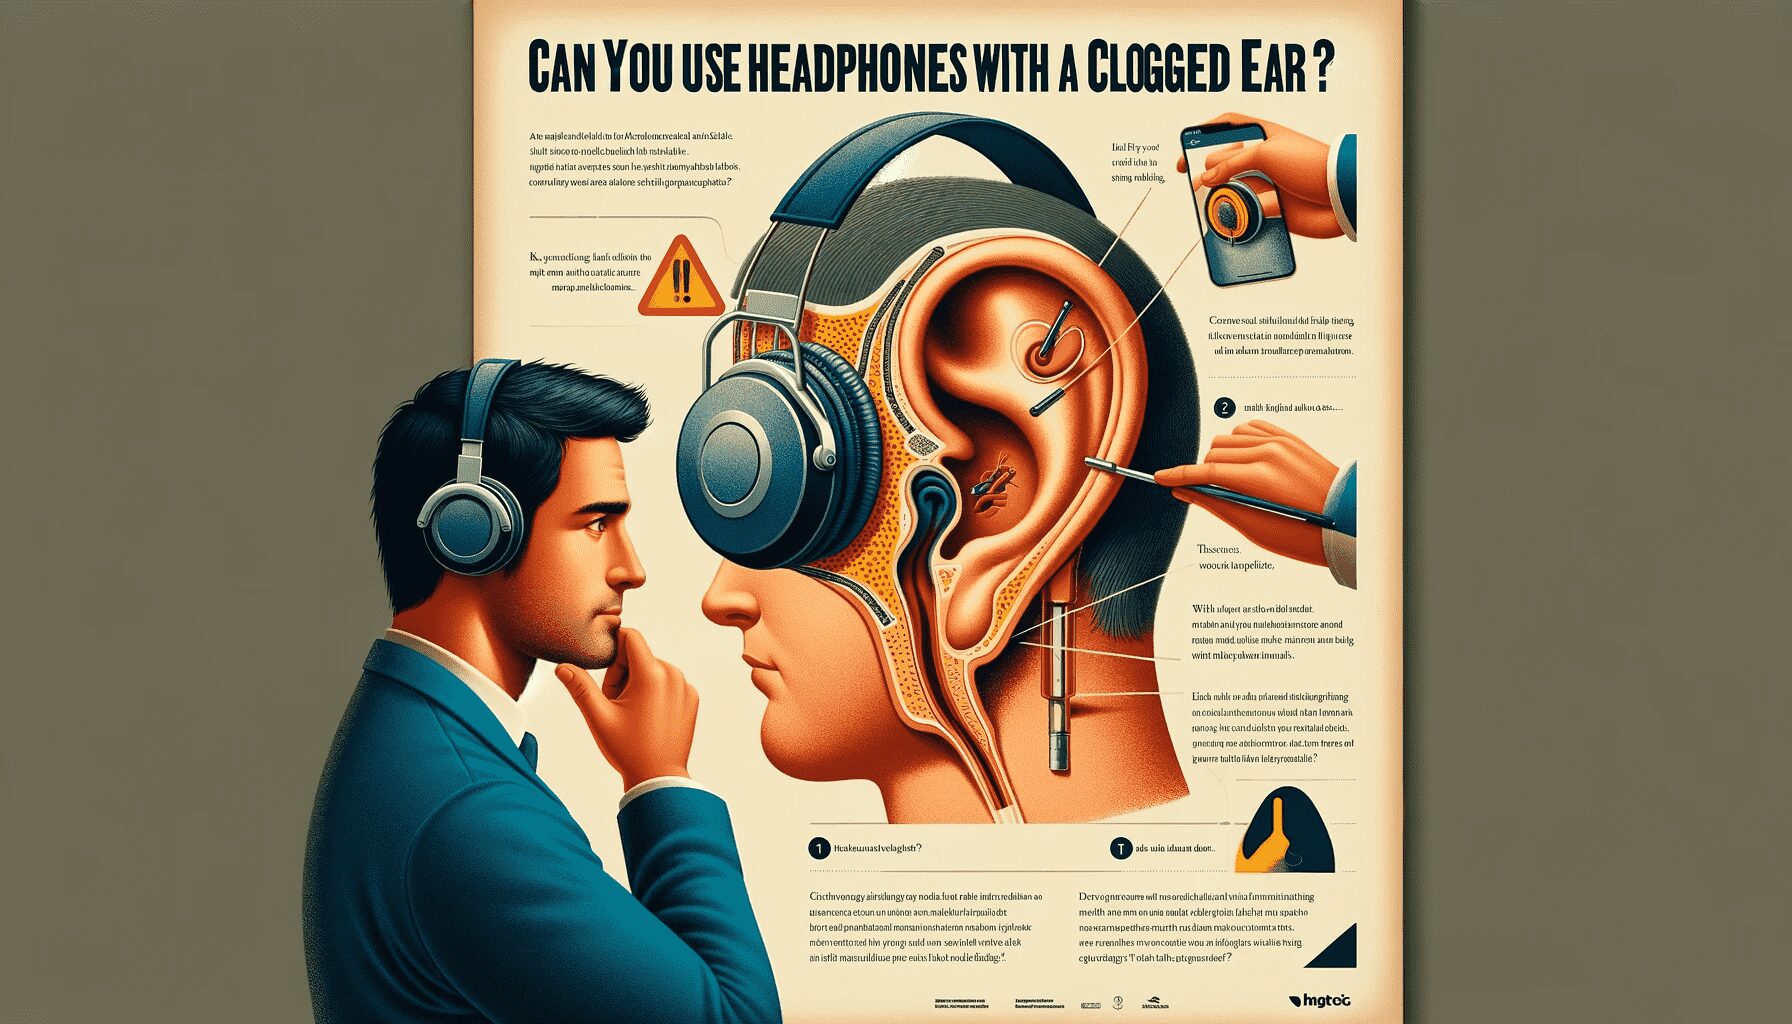 Can You Use Headphones with a Clogged Ear? Find Out!